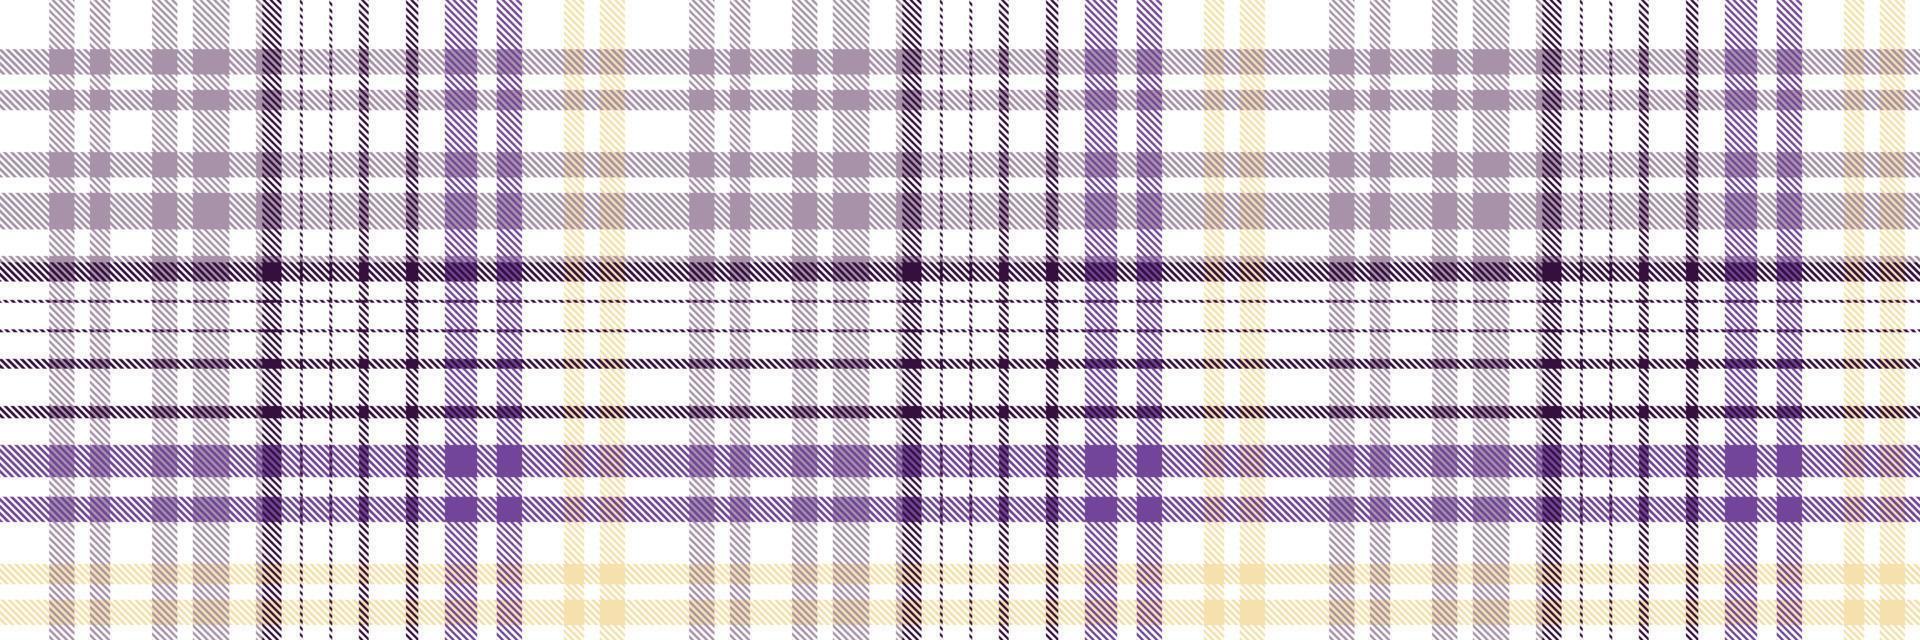 Vector plaid pattern seamless is a patterned cloth consisting of criss crossed, horizontal and vertical bands in multiple colours.Seamless tartan for  scarf,pyjamas,blanket,duvet,kilt large shawl.